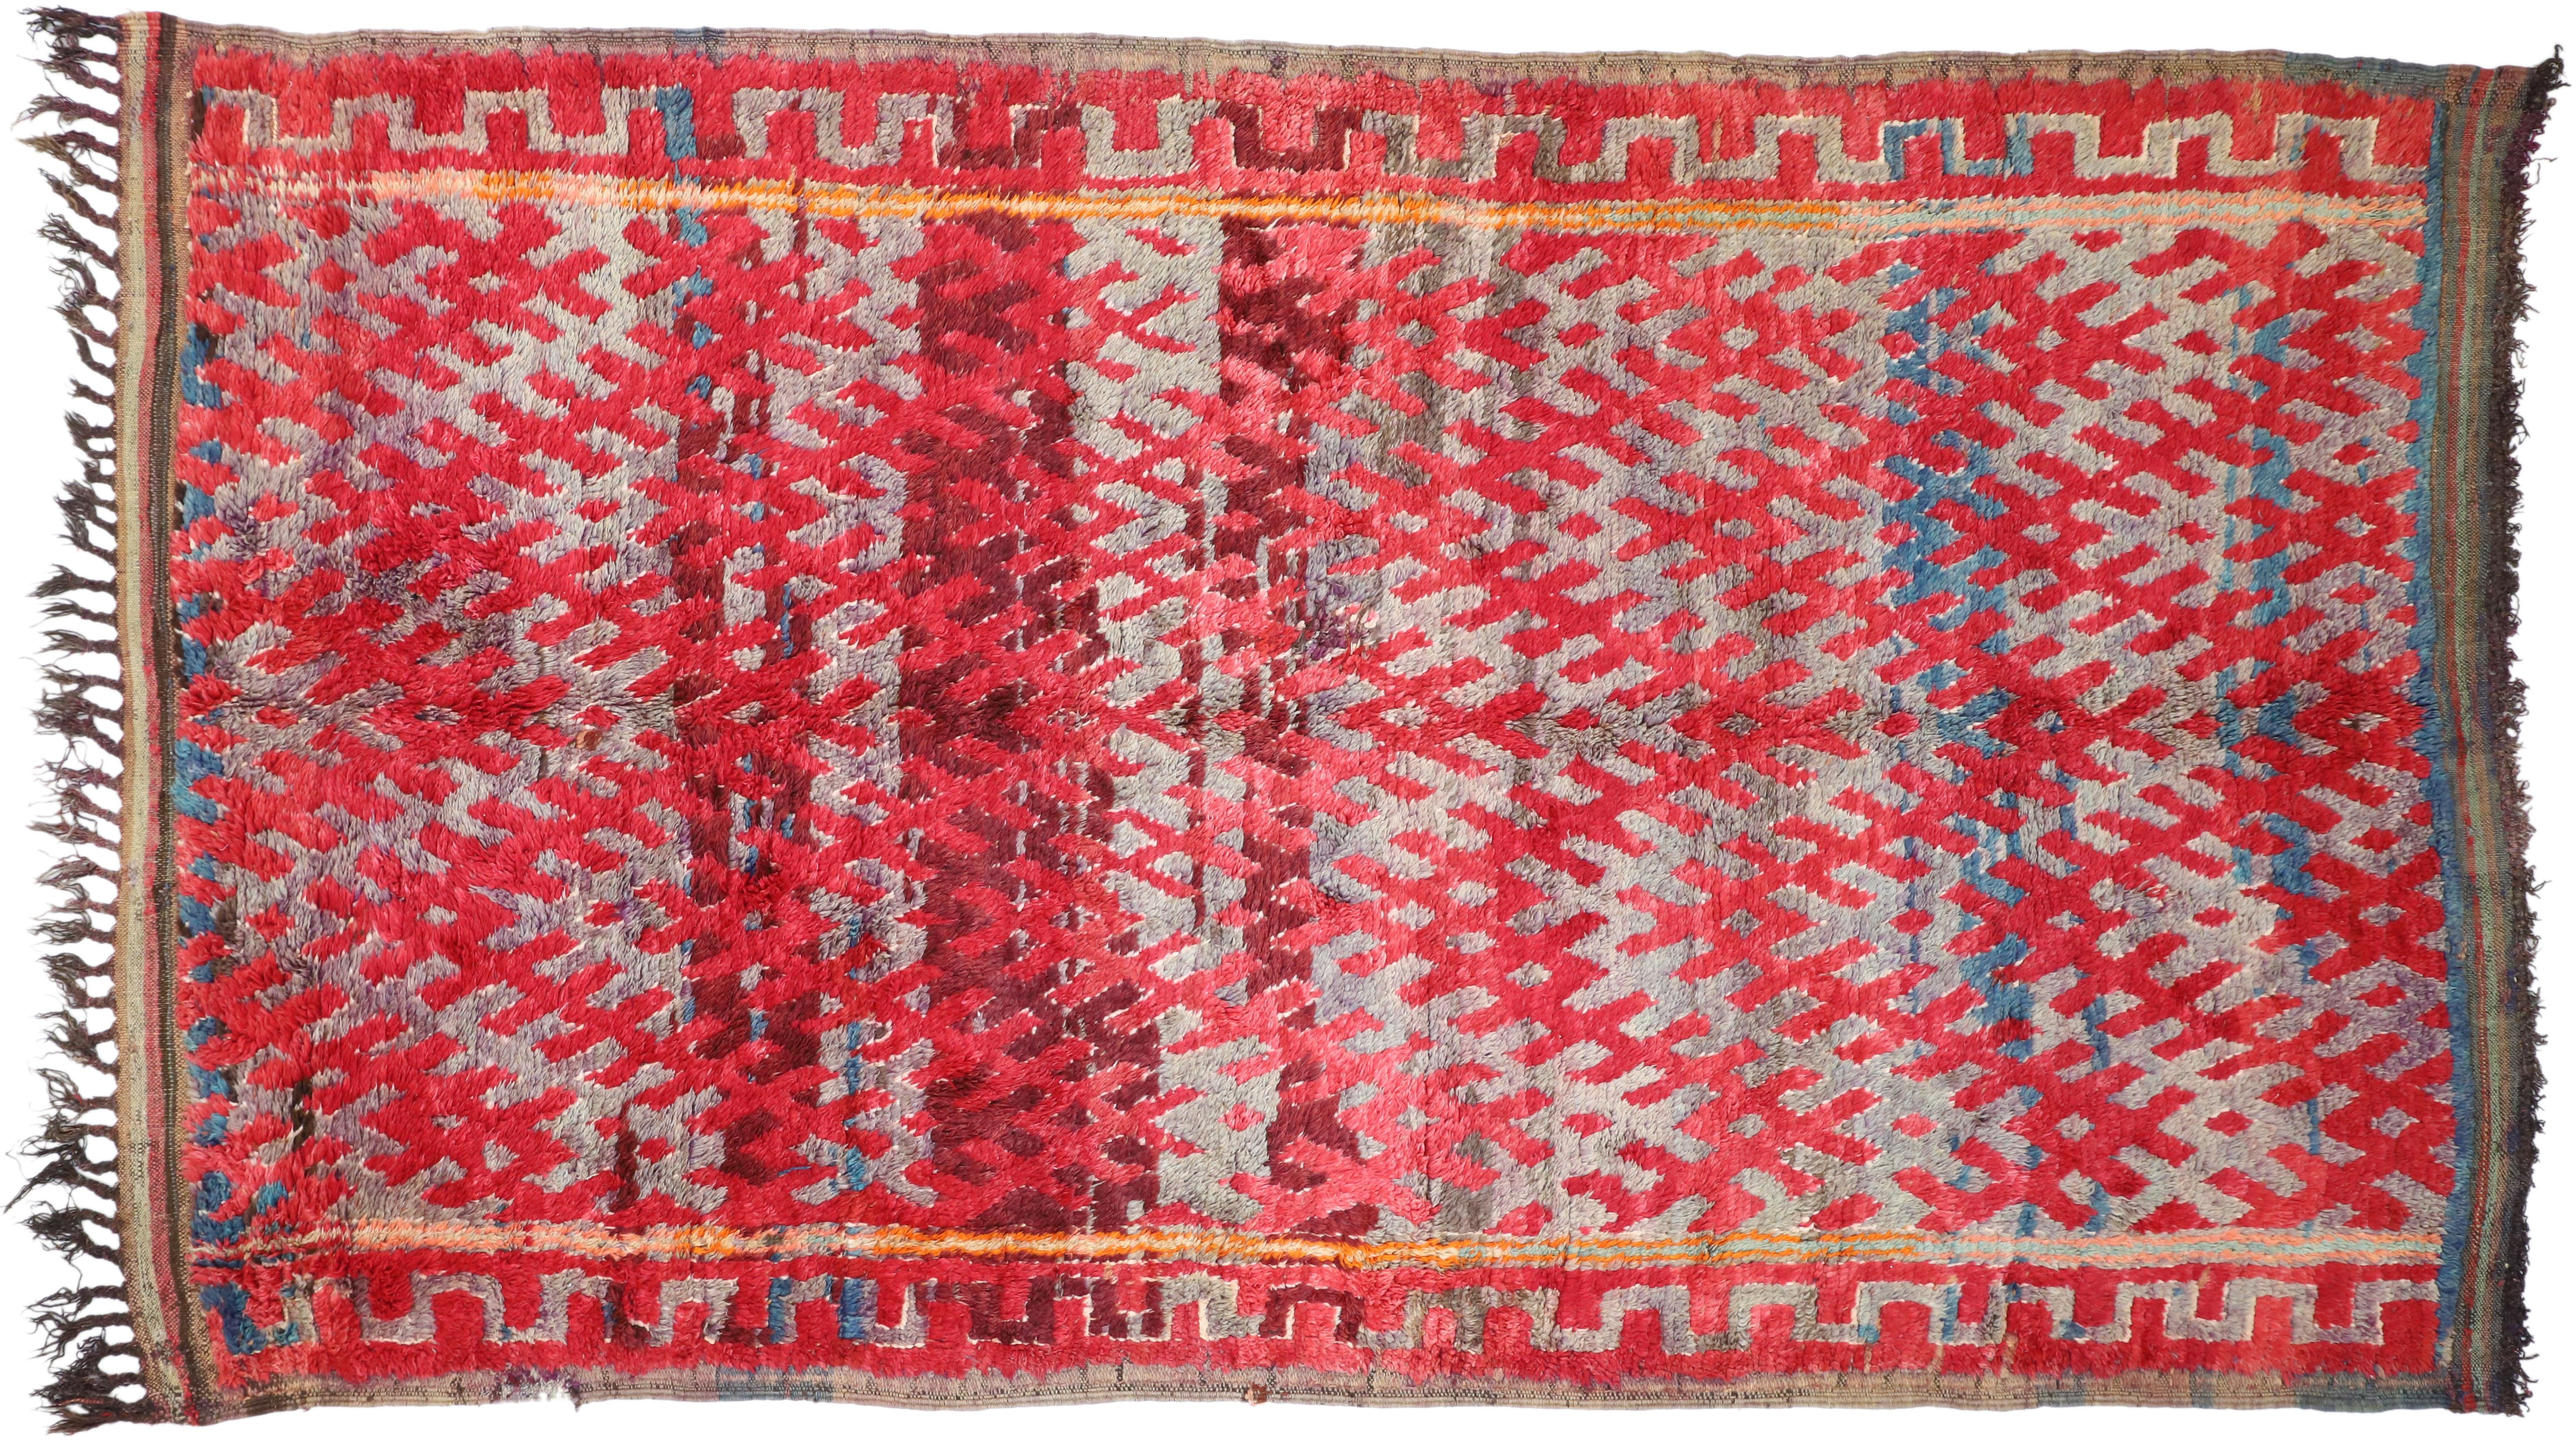 Vintage Moroccan Rug, Berber Moroccan Rug with Vibrant Mid-Century Modern Style 2